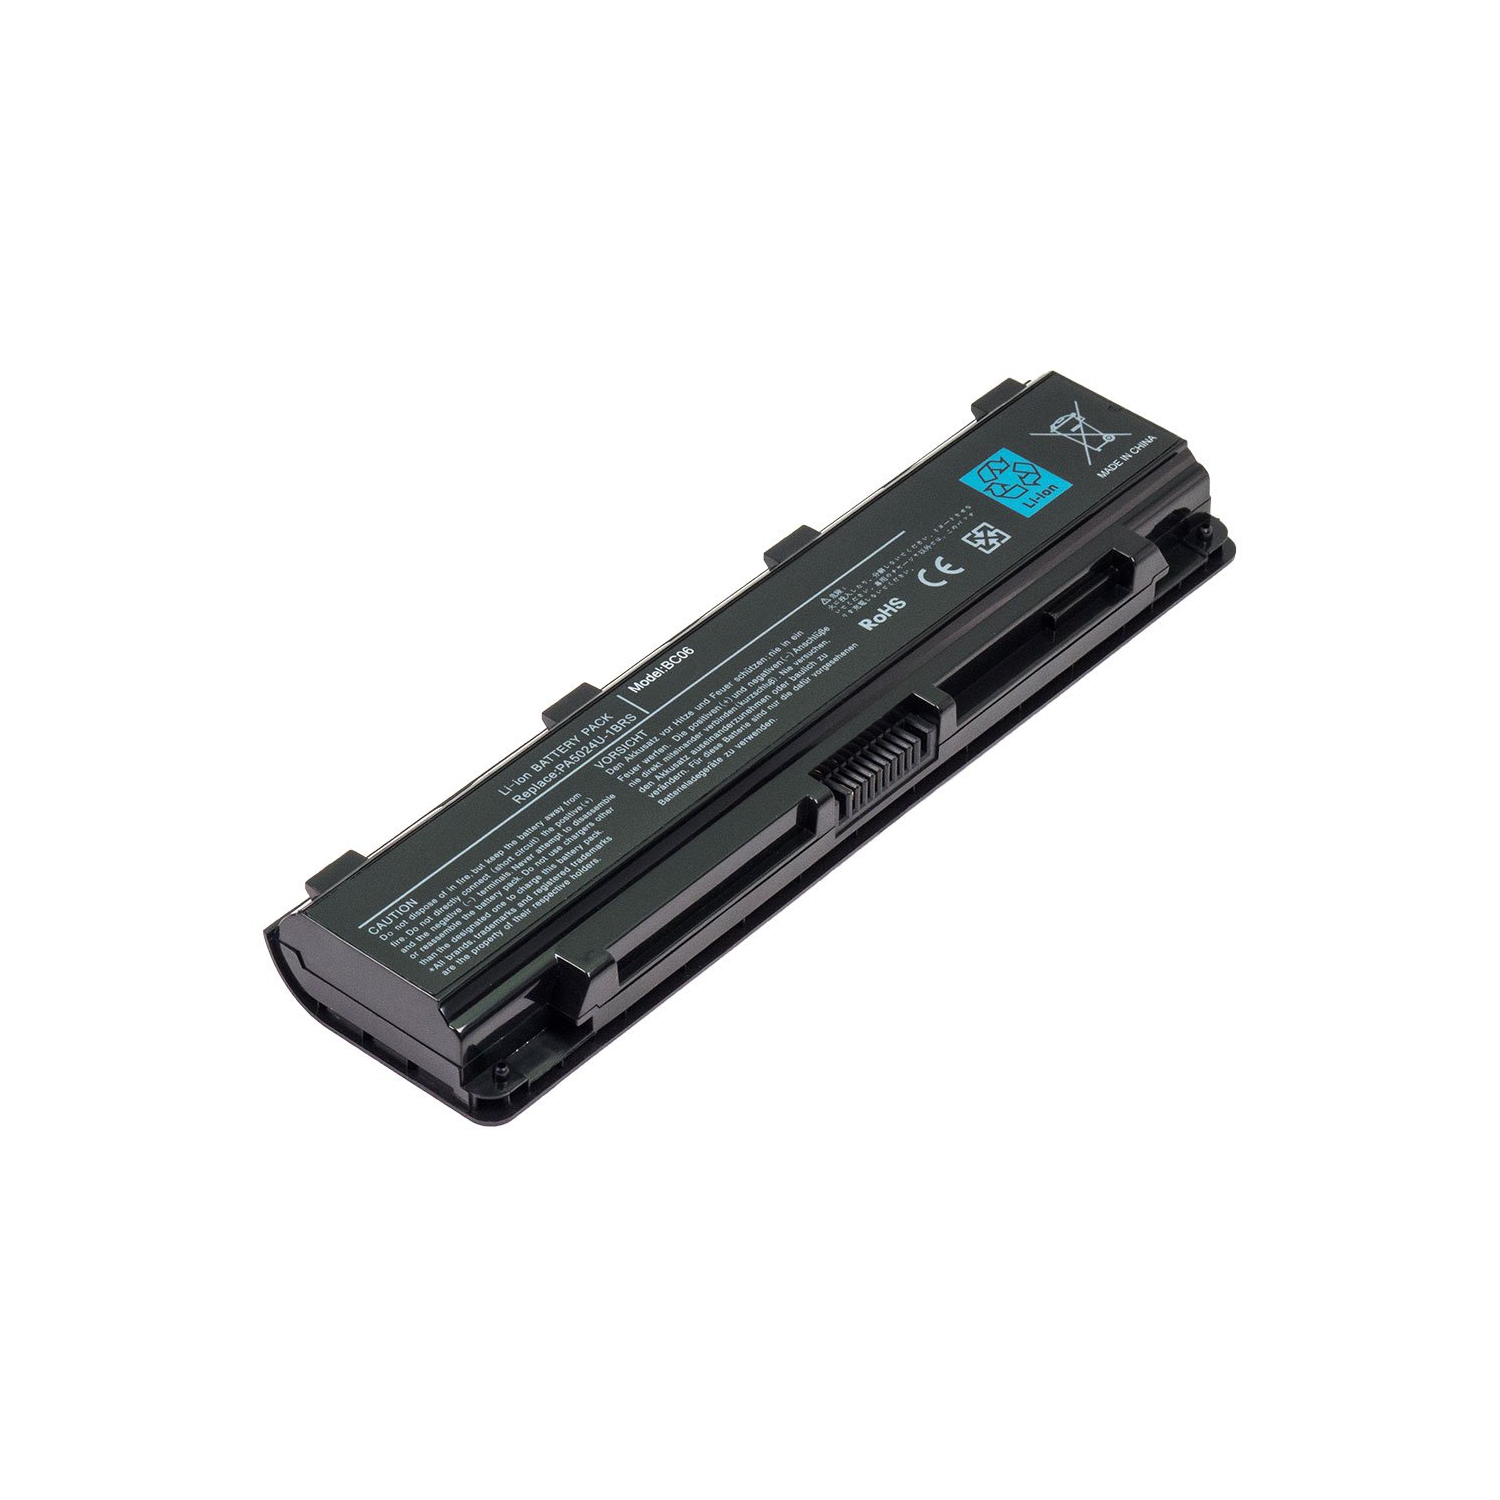 Laptop Battery Replacement for Toshiba Satellite Pro C50-A-1MR, PABAS262, PABAS263, PABAS274